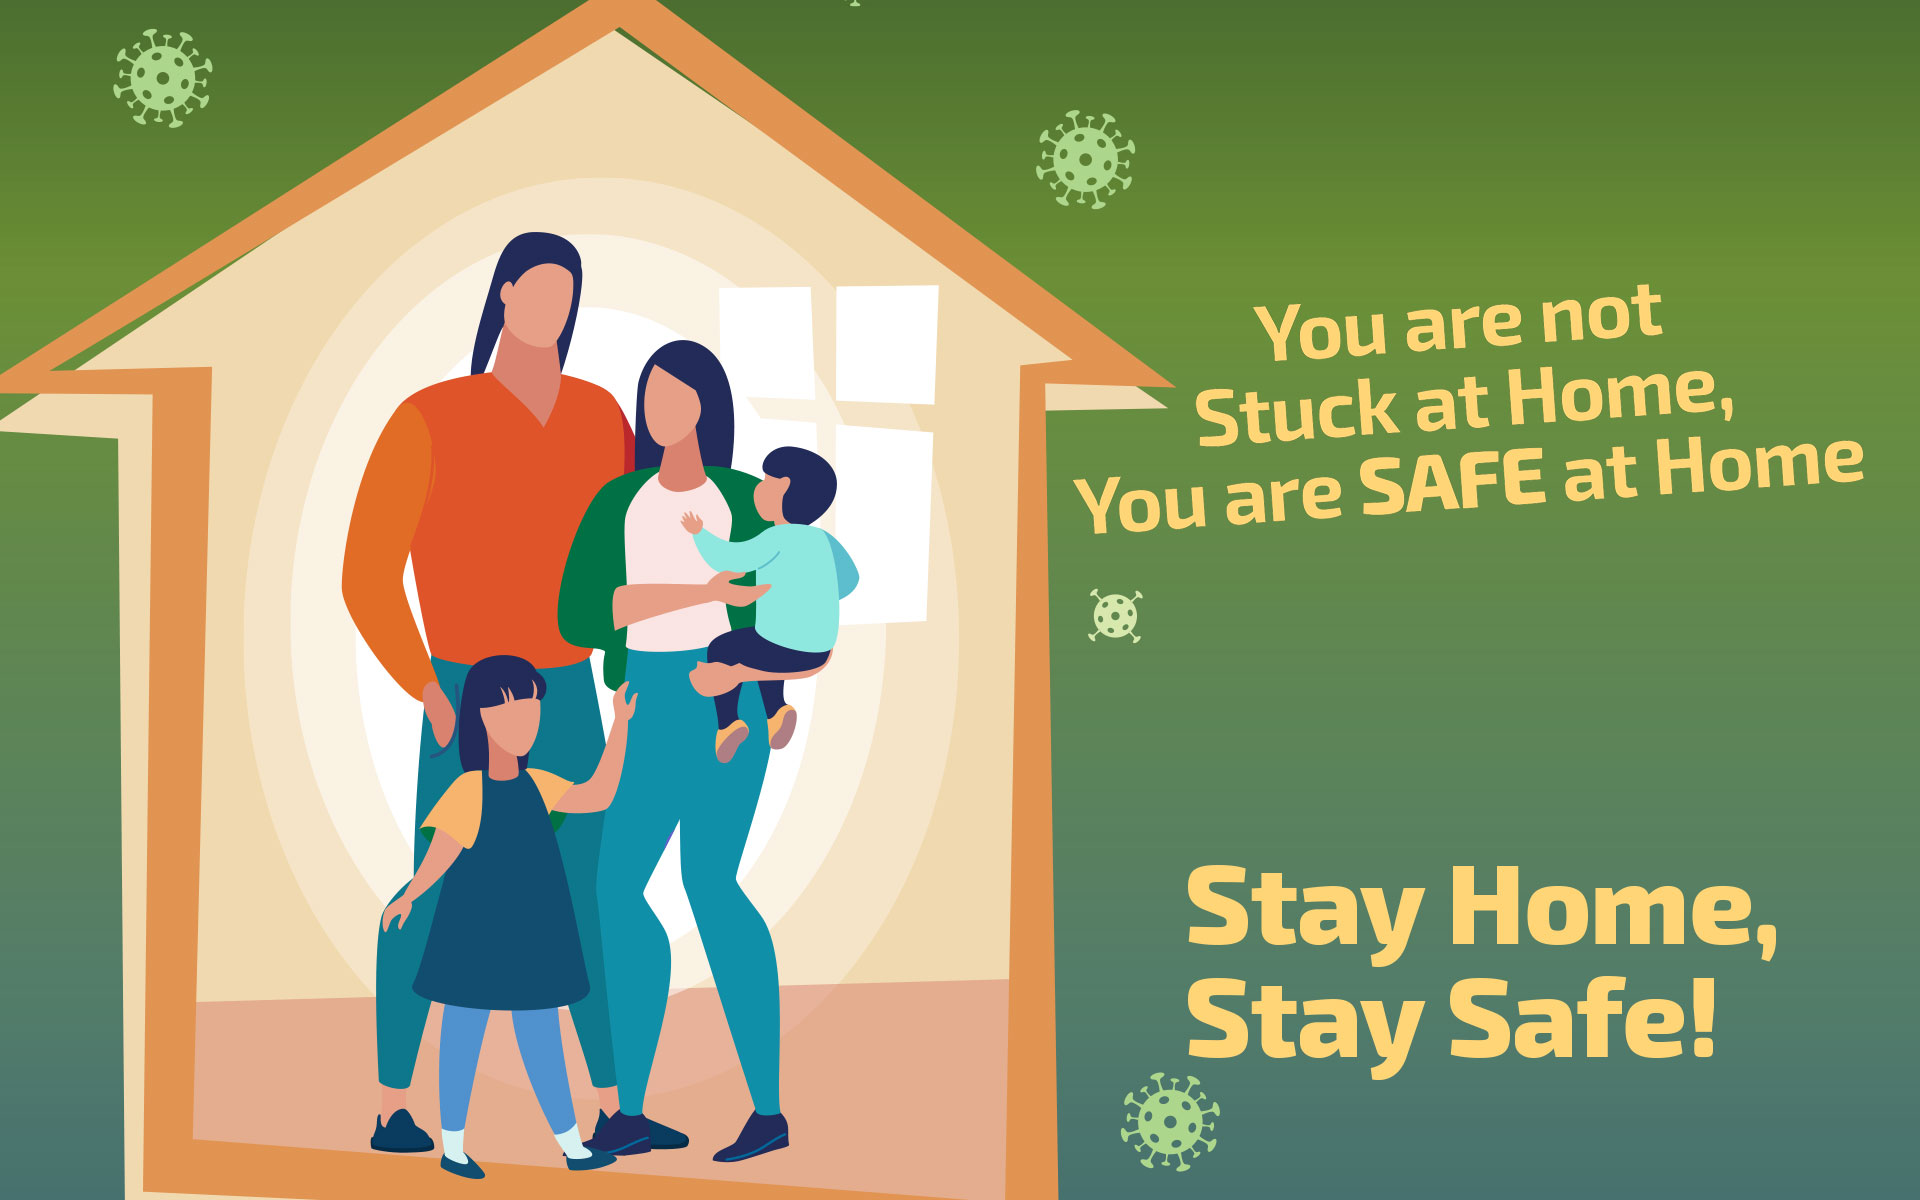 Stay home stay safe